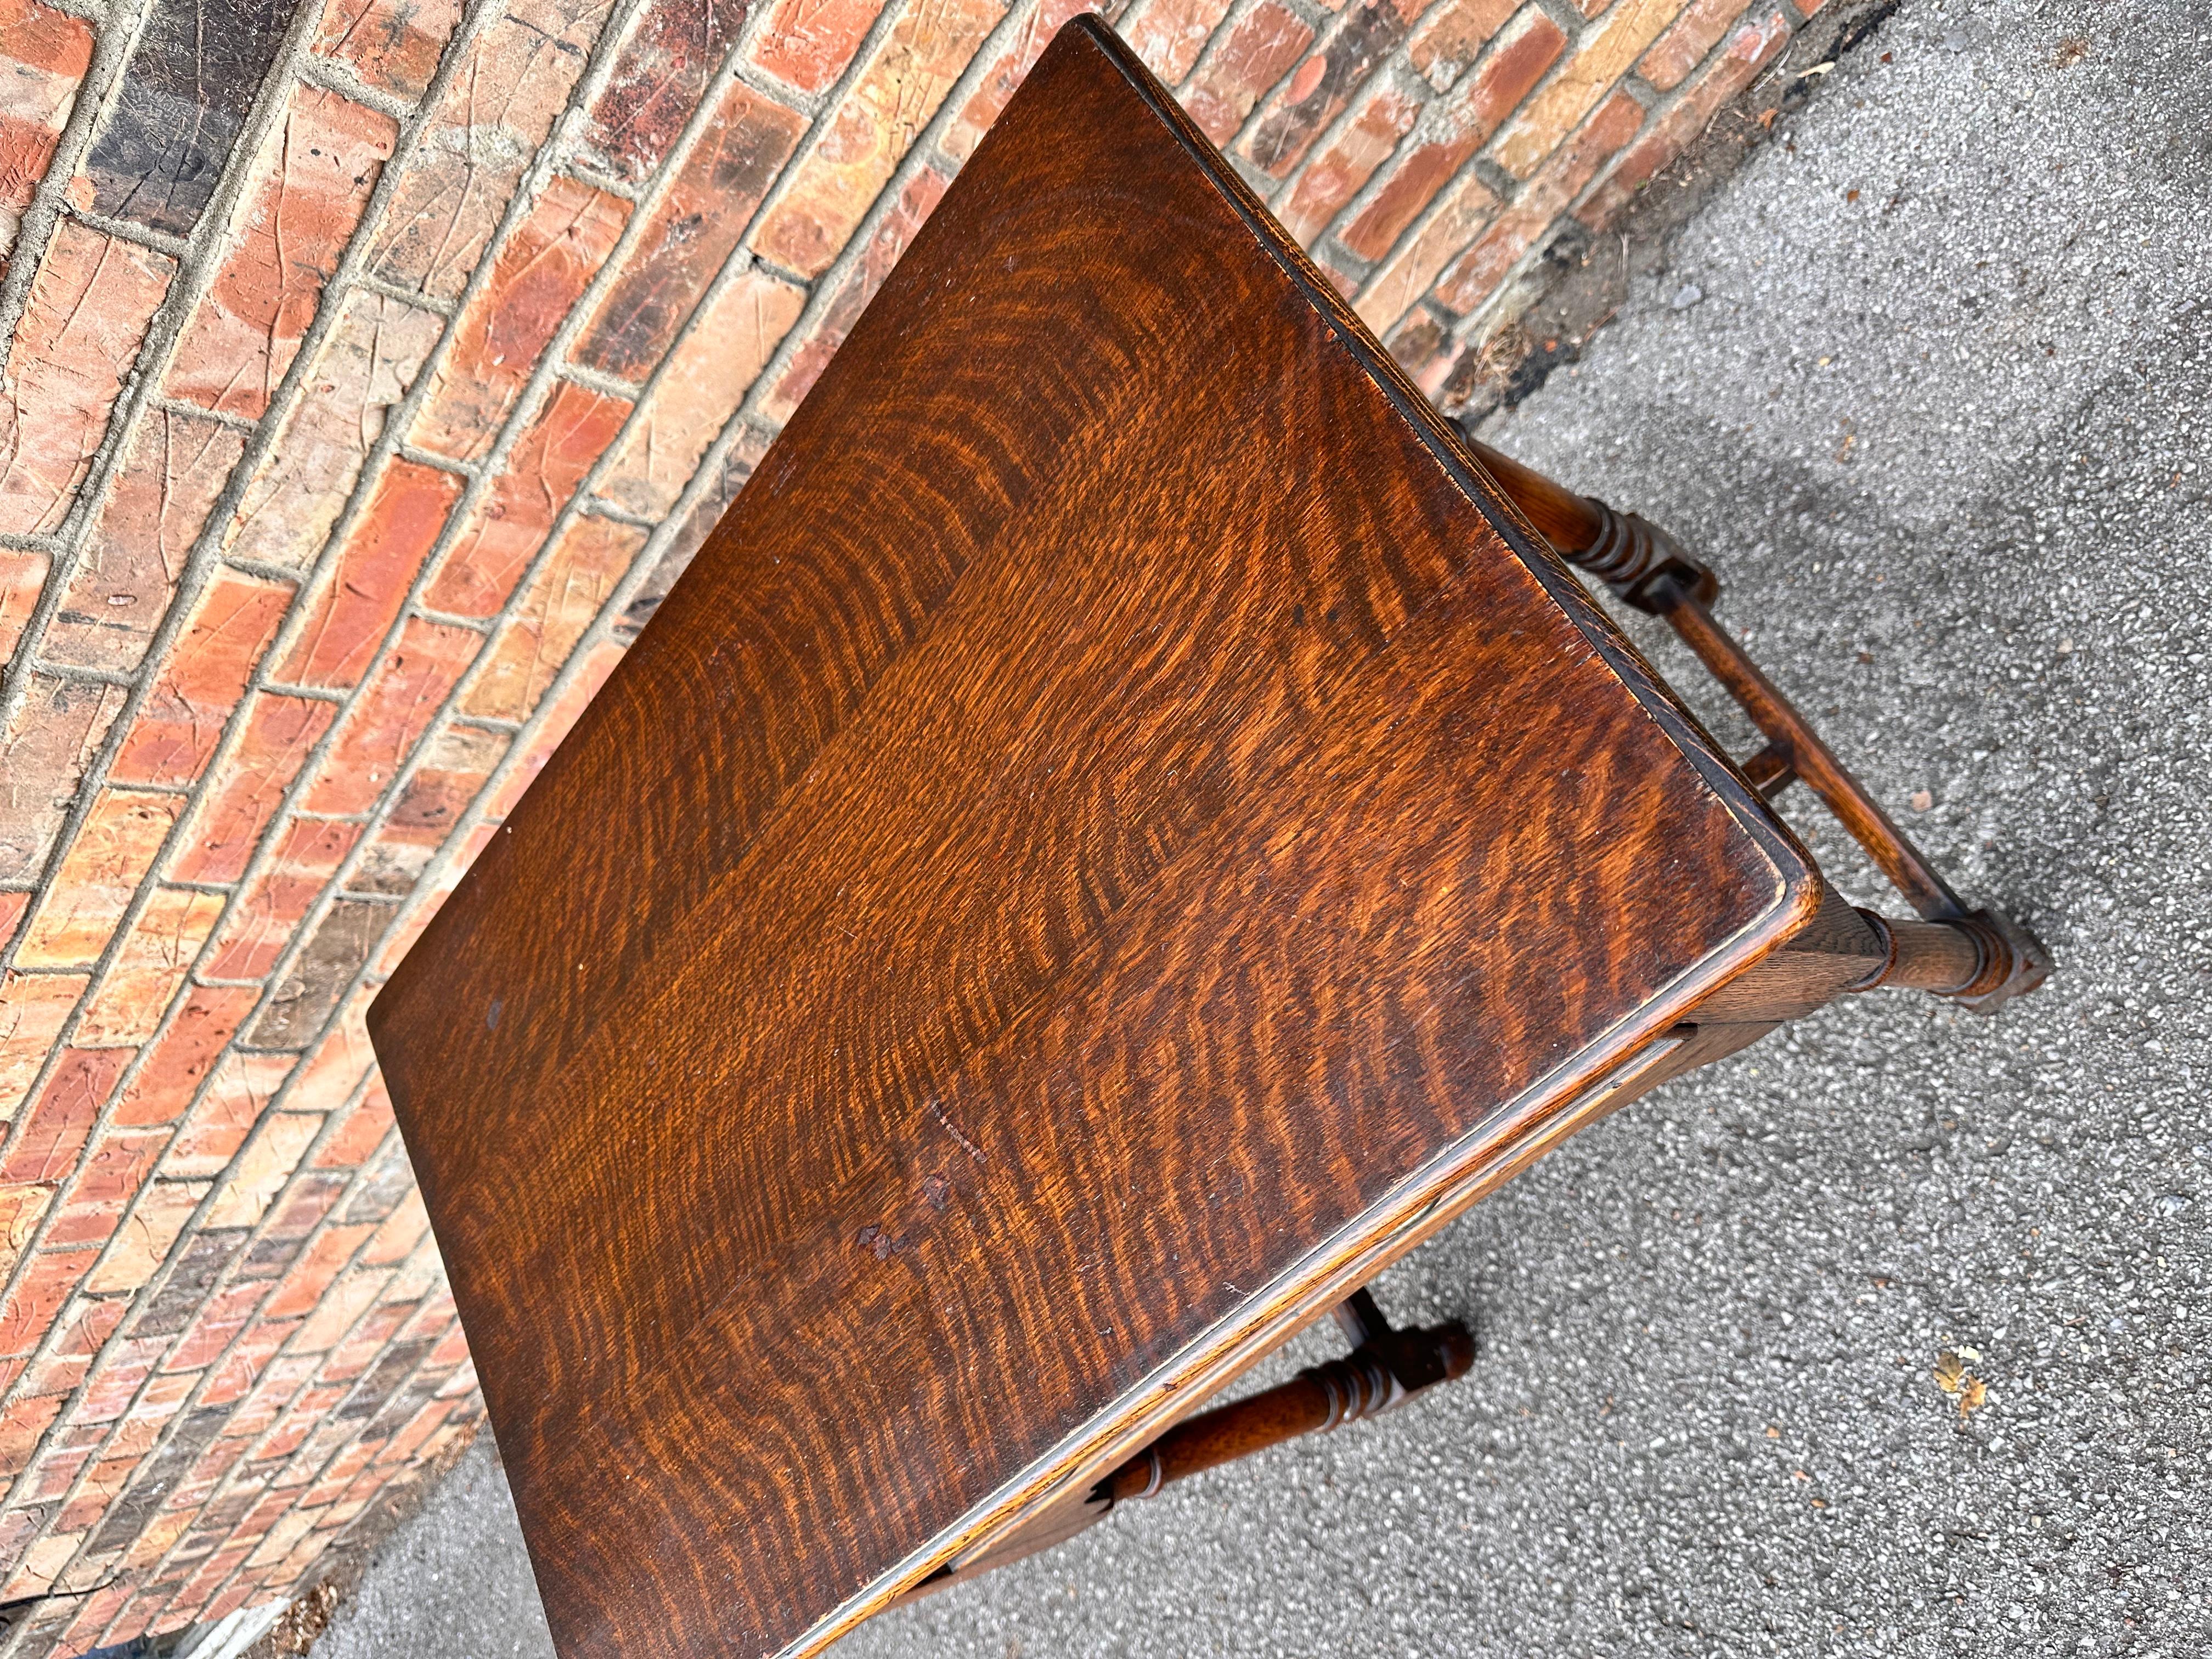 This is a beautiful English side table! The color and patina of this piece is amazing! This side table is sturdy and mature with a great patina due to age. This piece is excellent way to add history and character to any home. #651